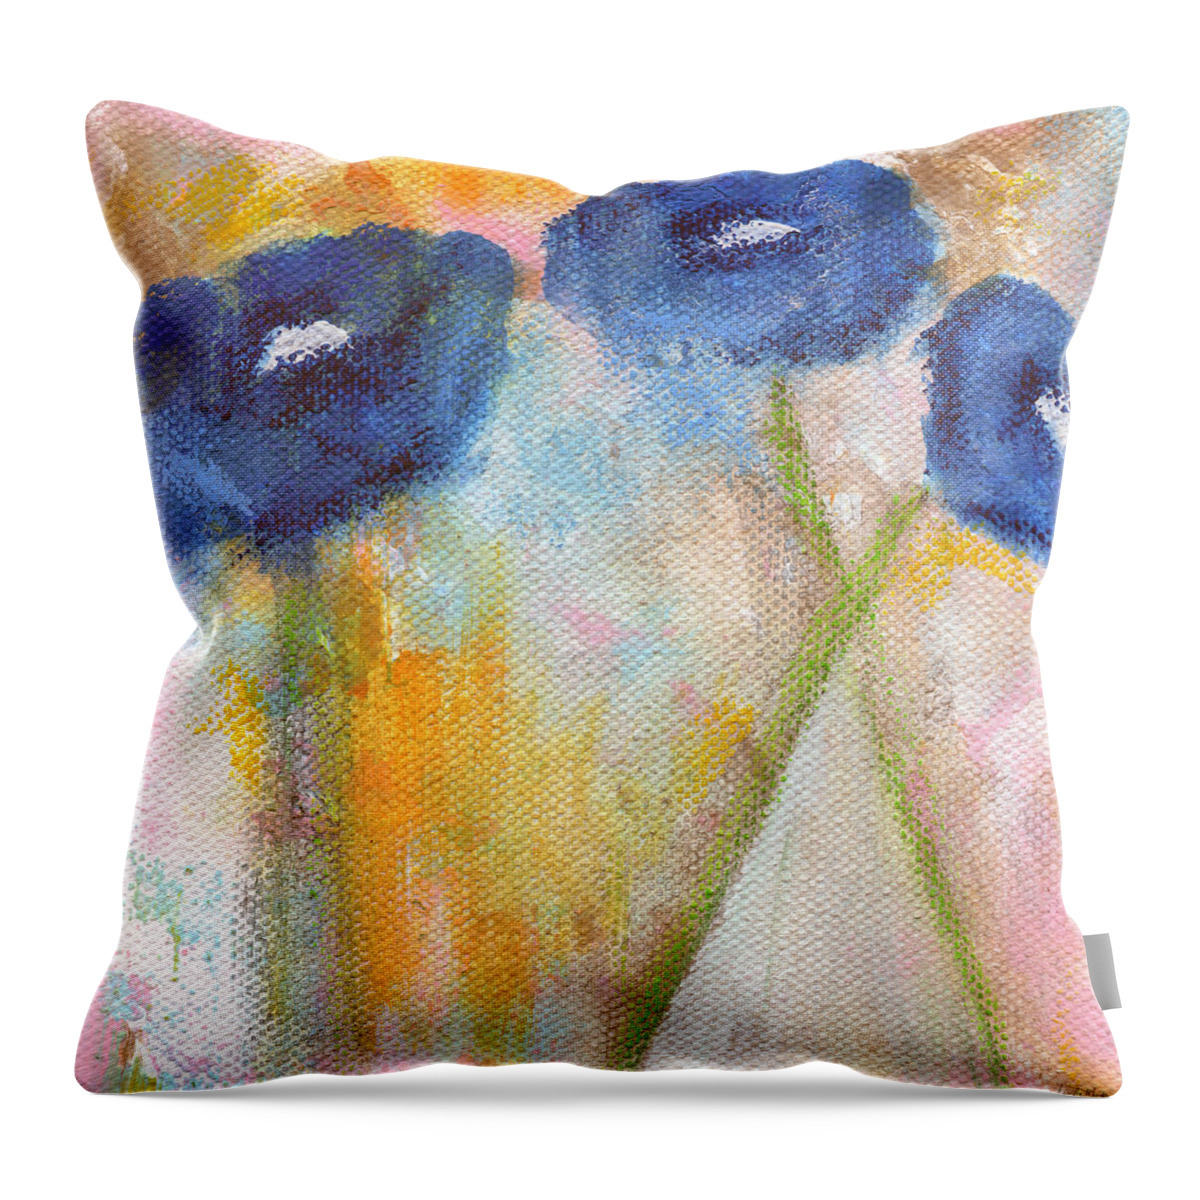 Flowers Throw Pillow featuring the painting Temporary Crossroads- Floral Art by Linda Woods by Linda Woods